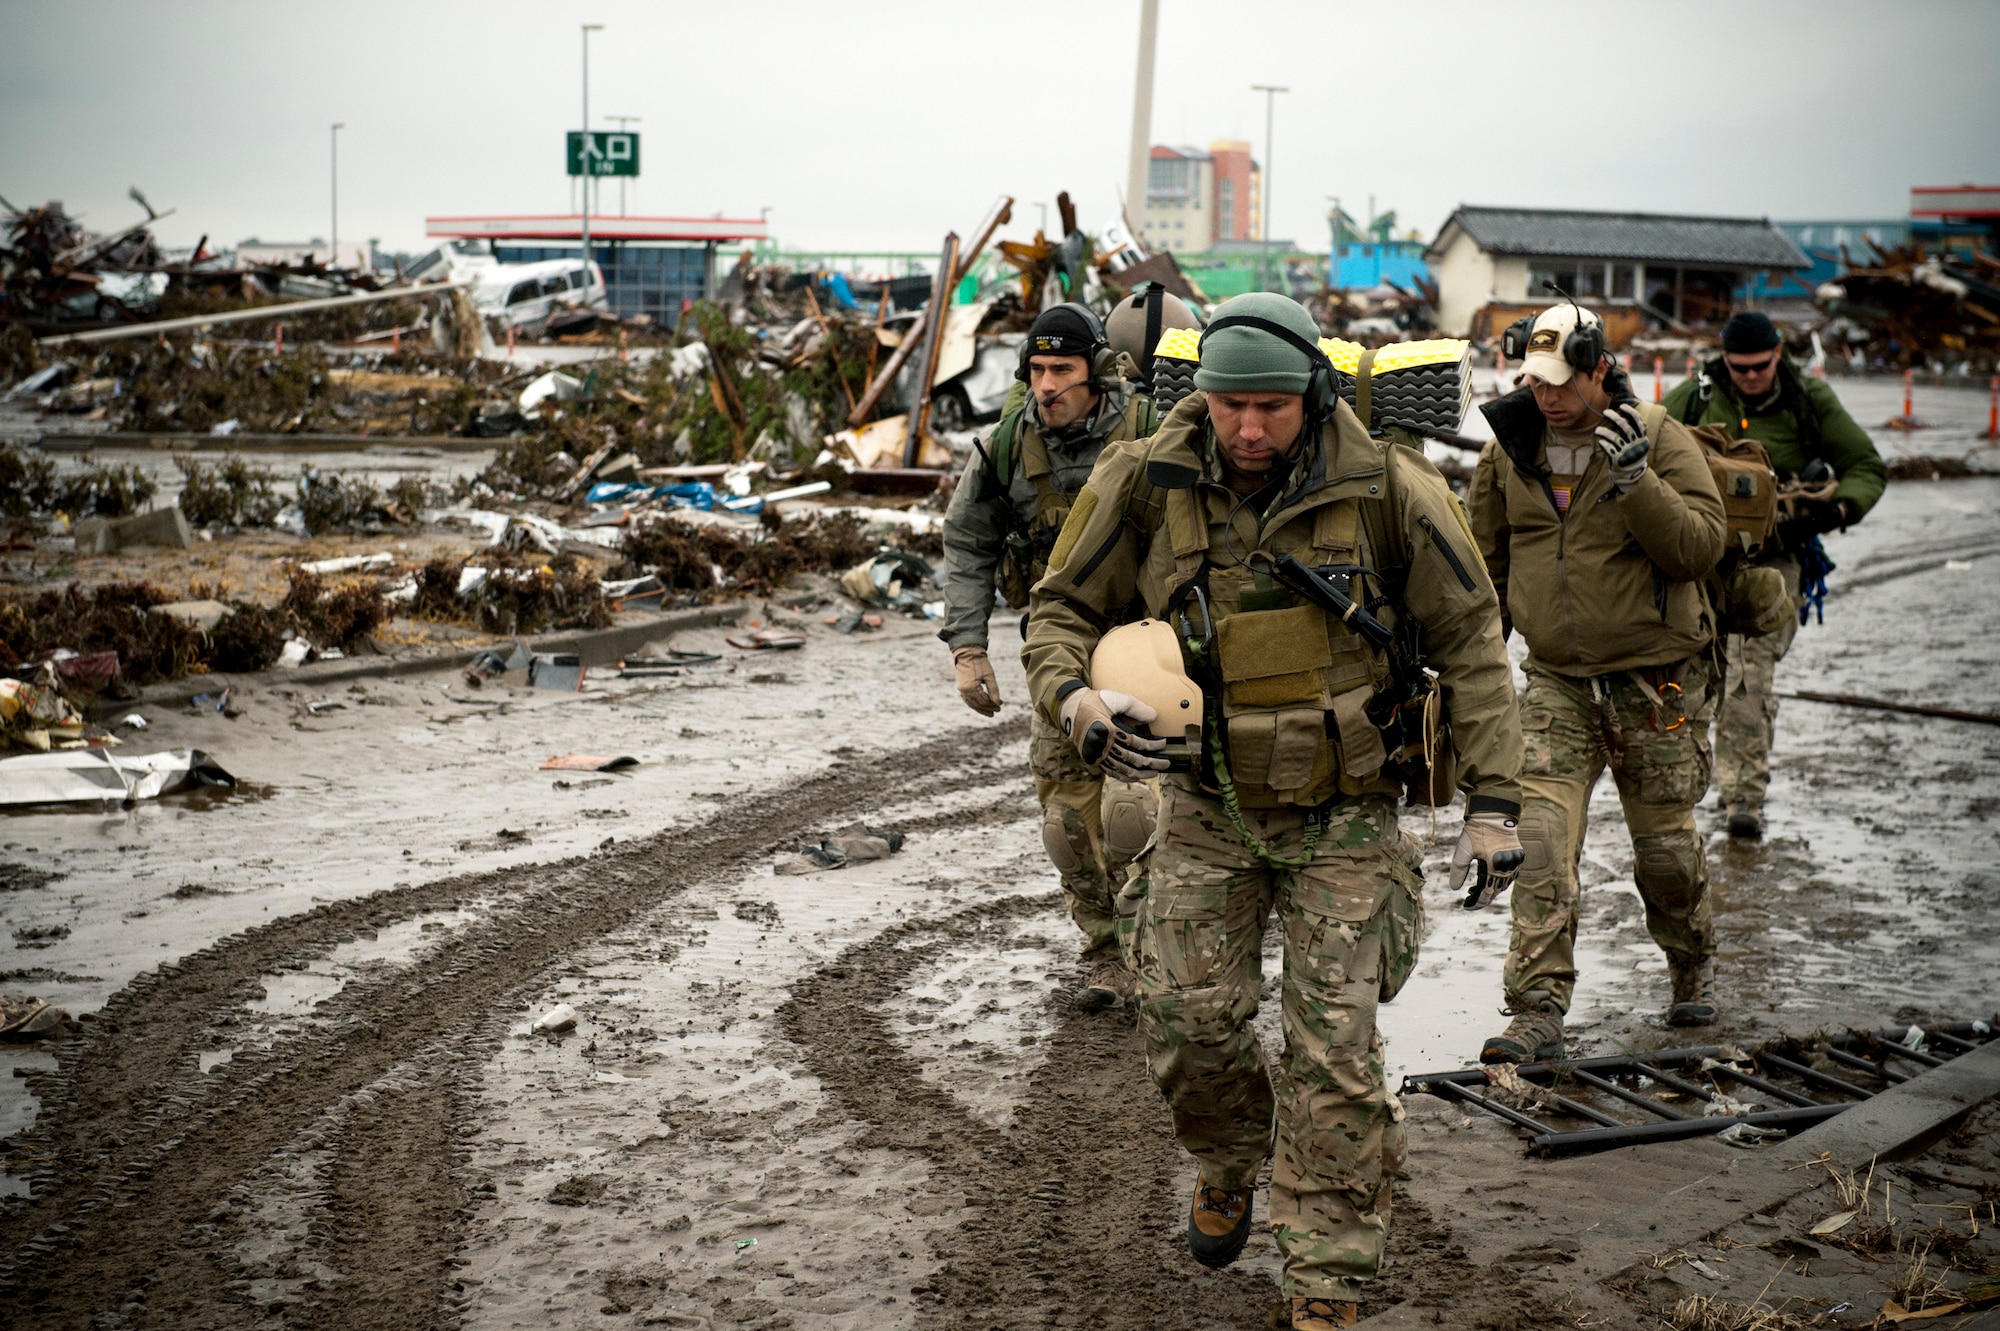 Members of the 320th Special Tactics Squadron arrive at Sendai Airport March 16 and begin to assess the damage and what they can do to help. (U.S. Air Force photo/Staff Sgt. Samuel Morse)